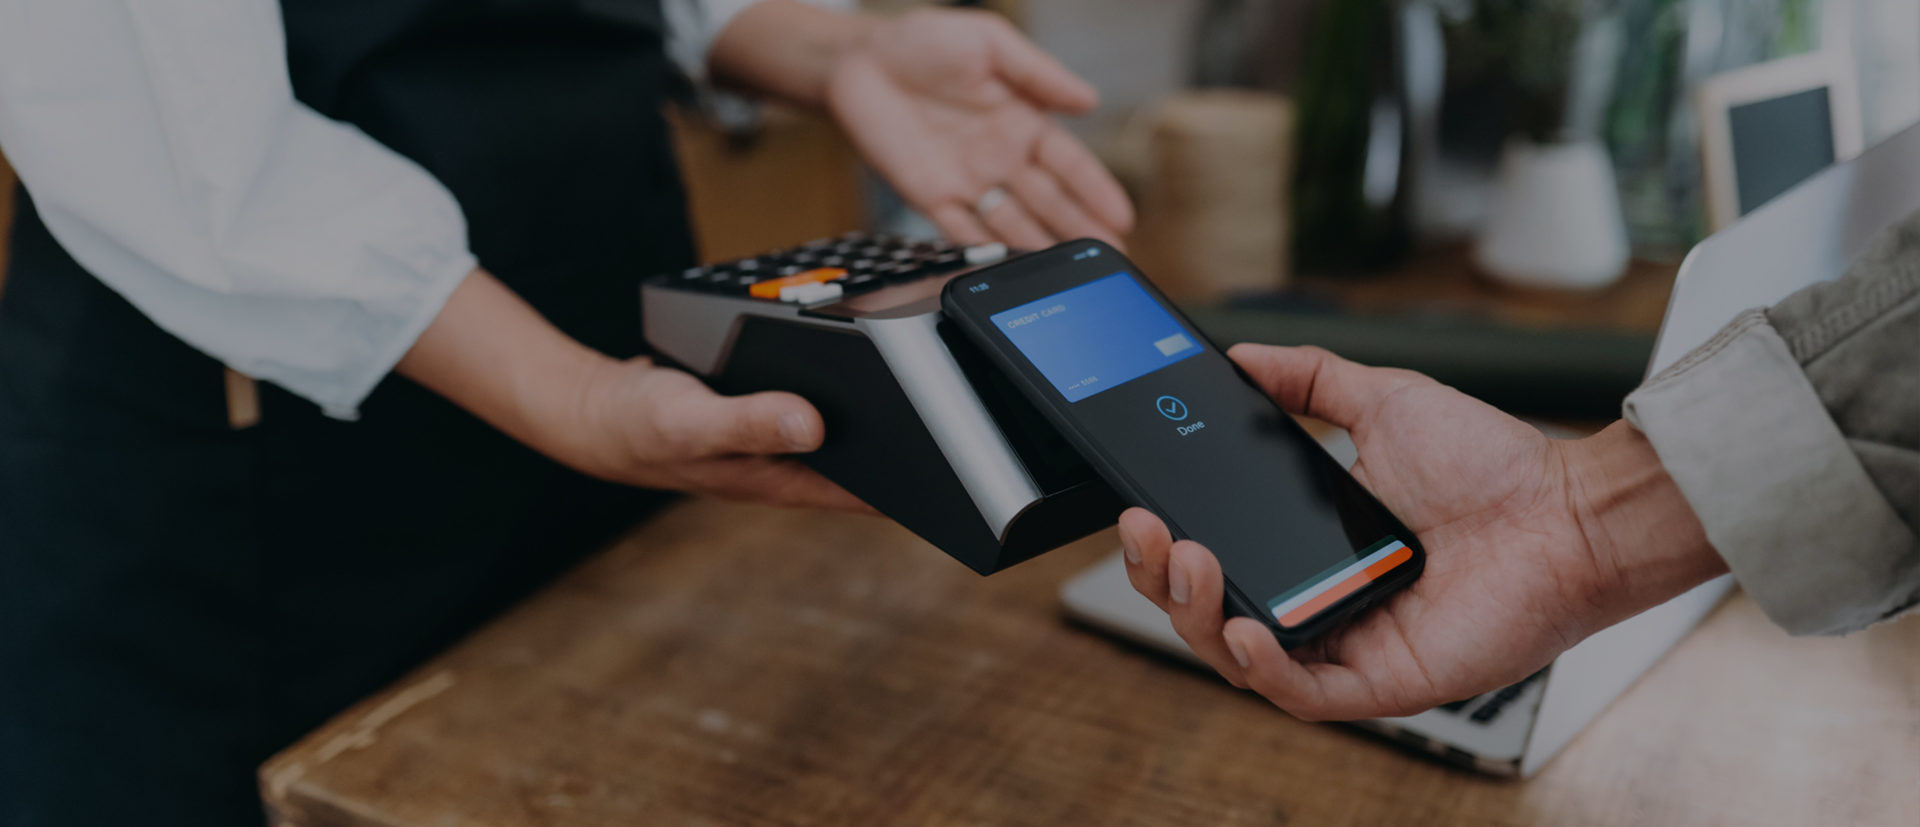 Currency has cashed in its chips – the future is in POS and NFC